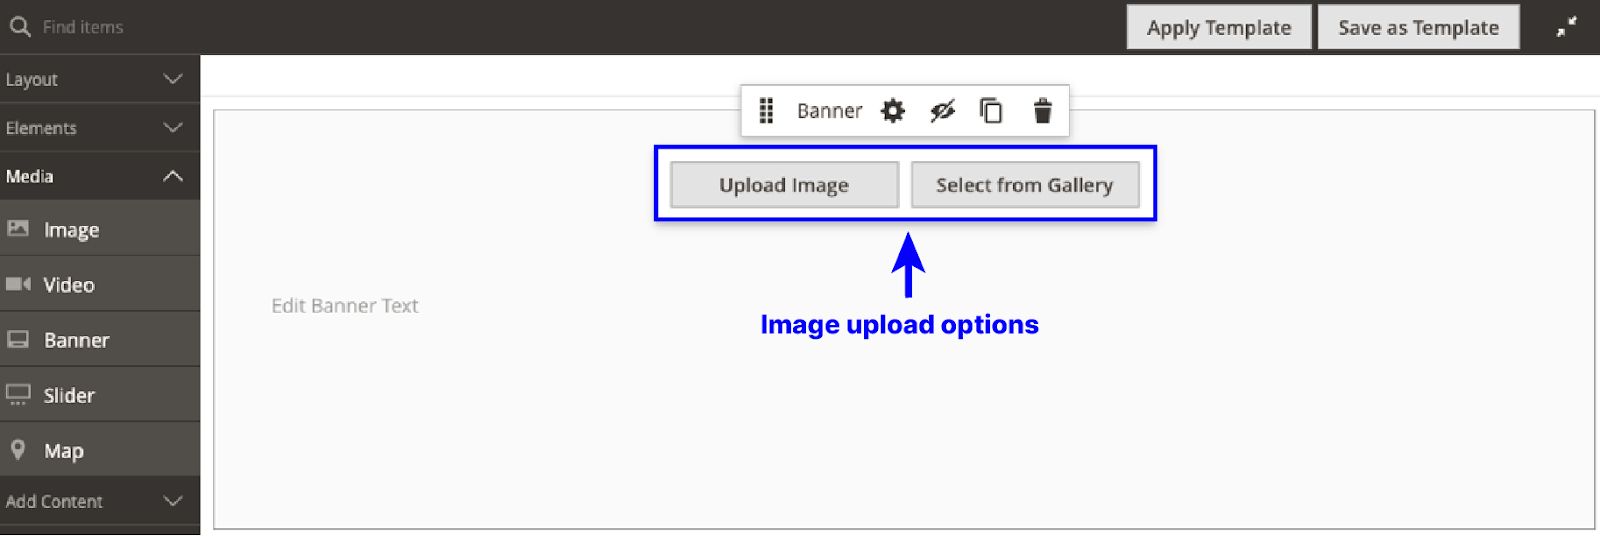 Set a banner image with the upload or gallery options in the toolbox options of the banner container